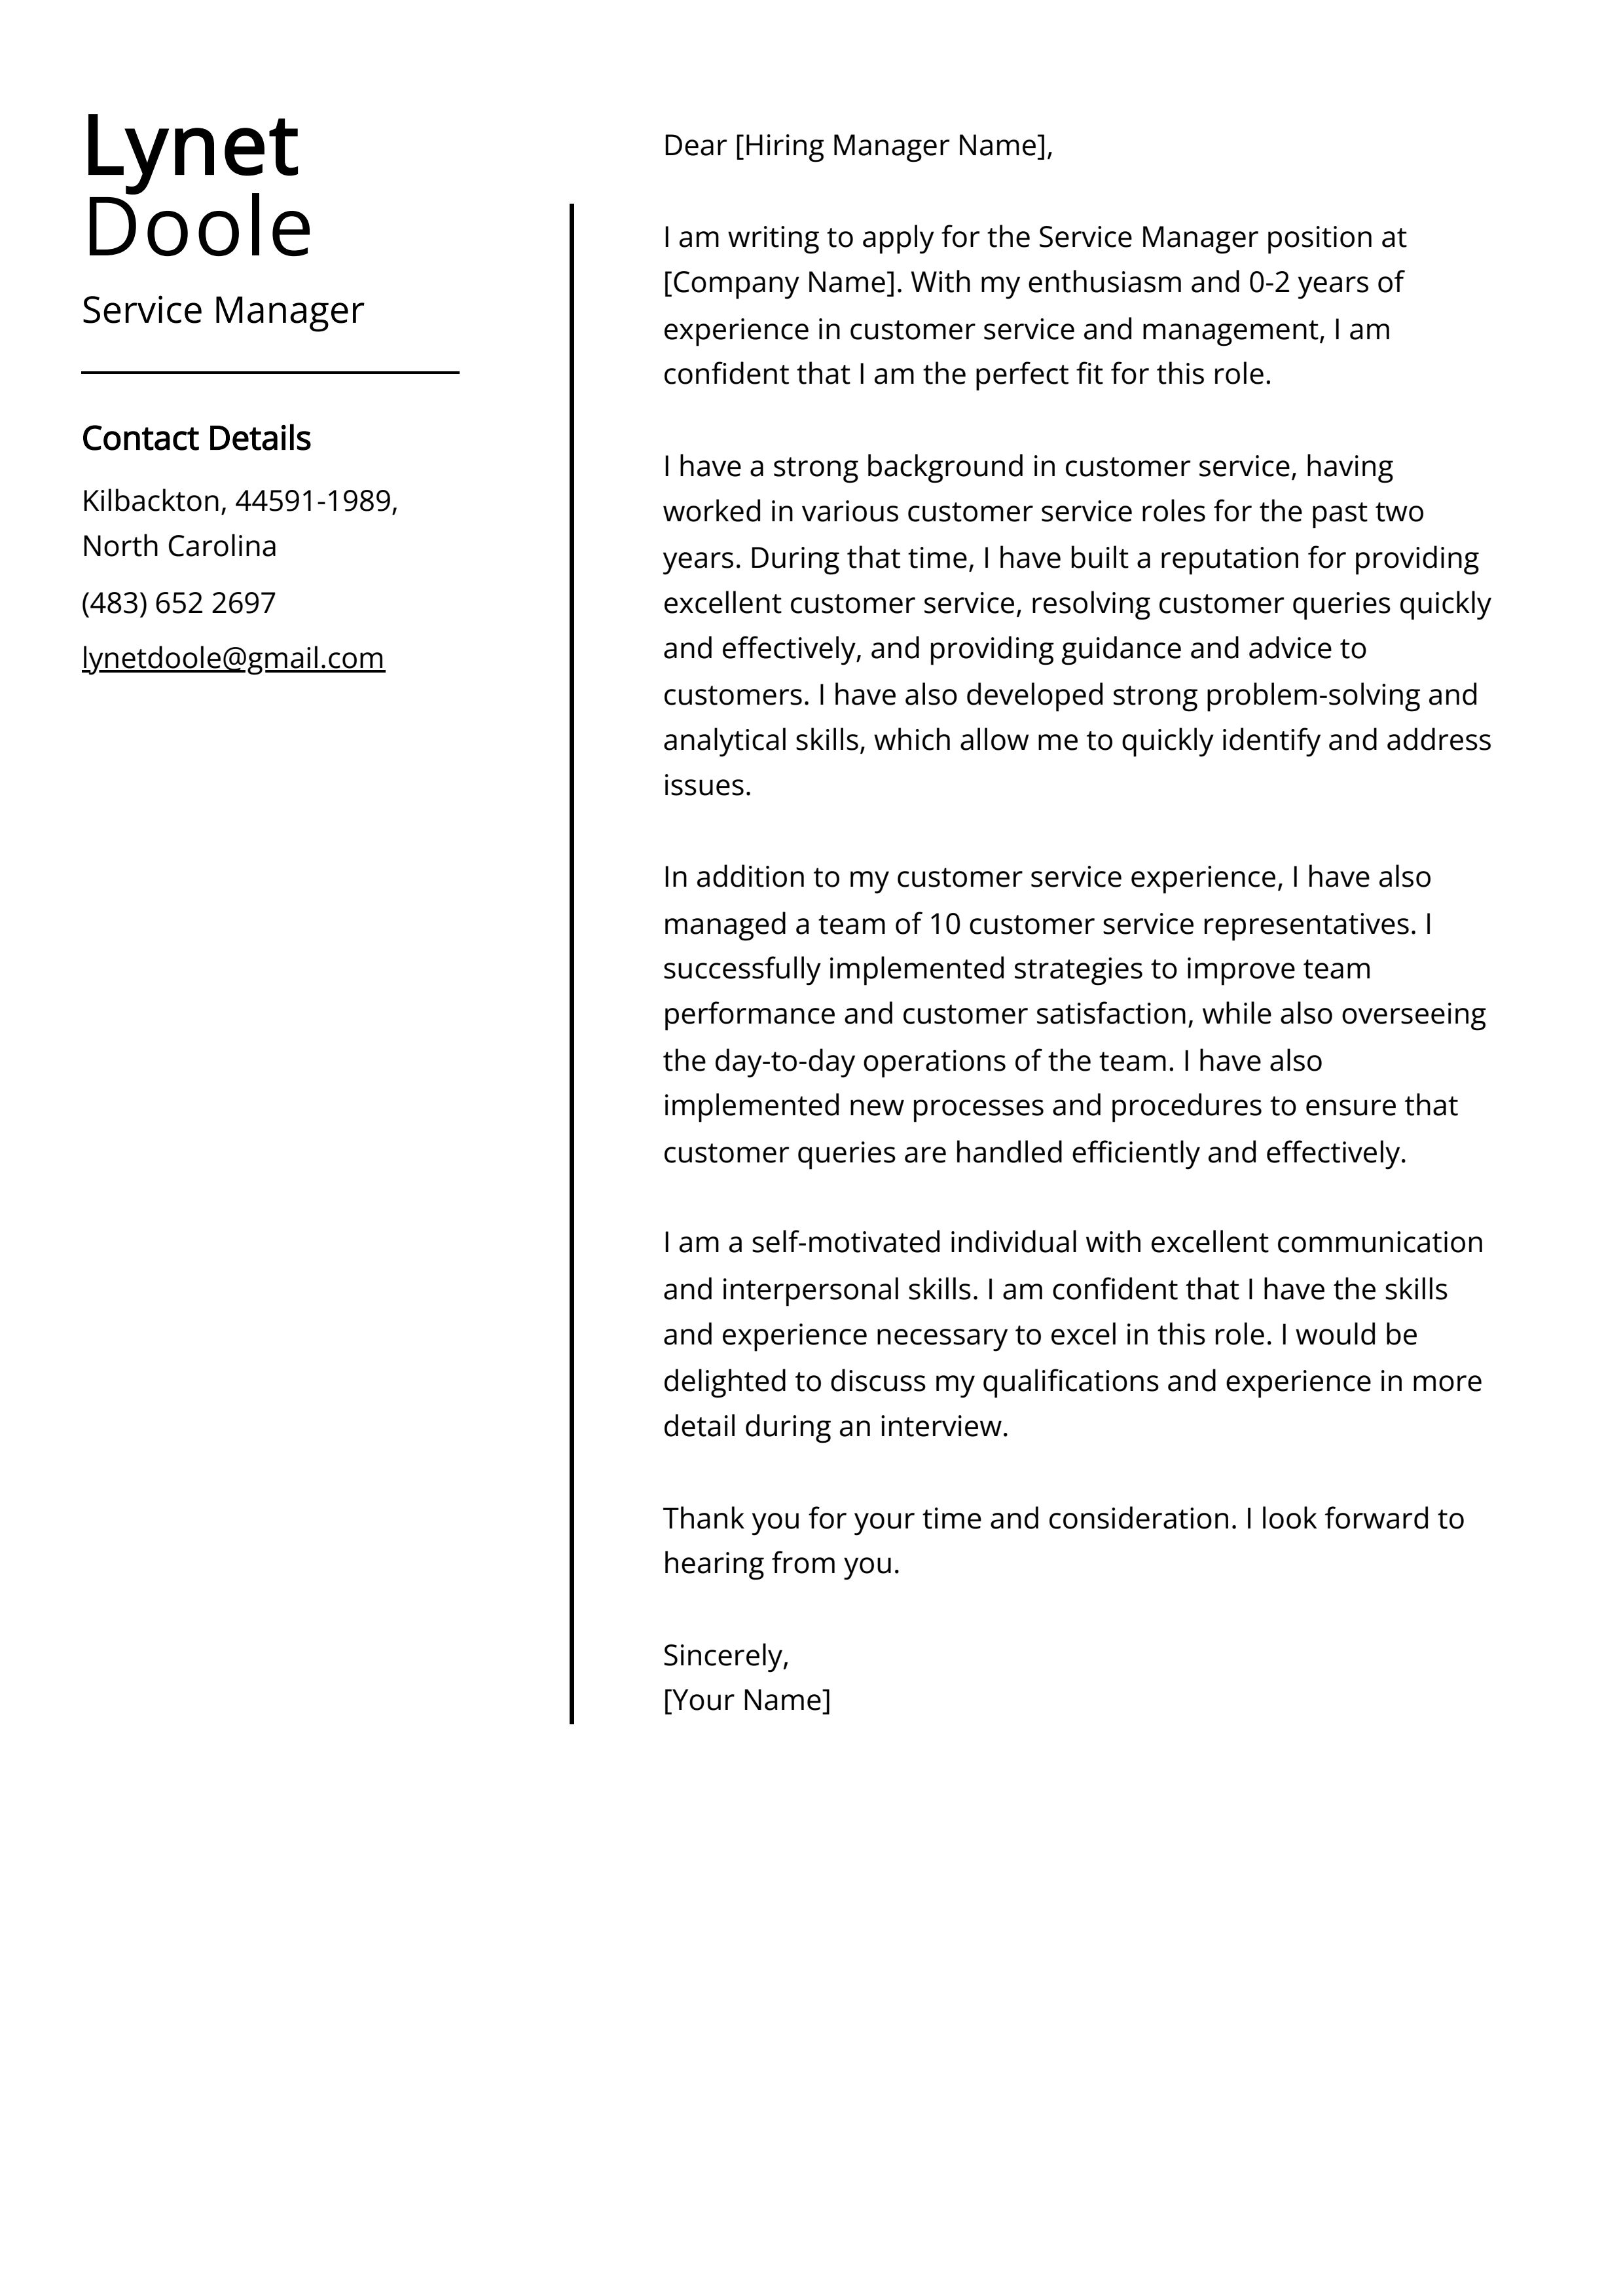 Service Manager Cover Letter Example